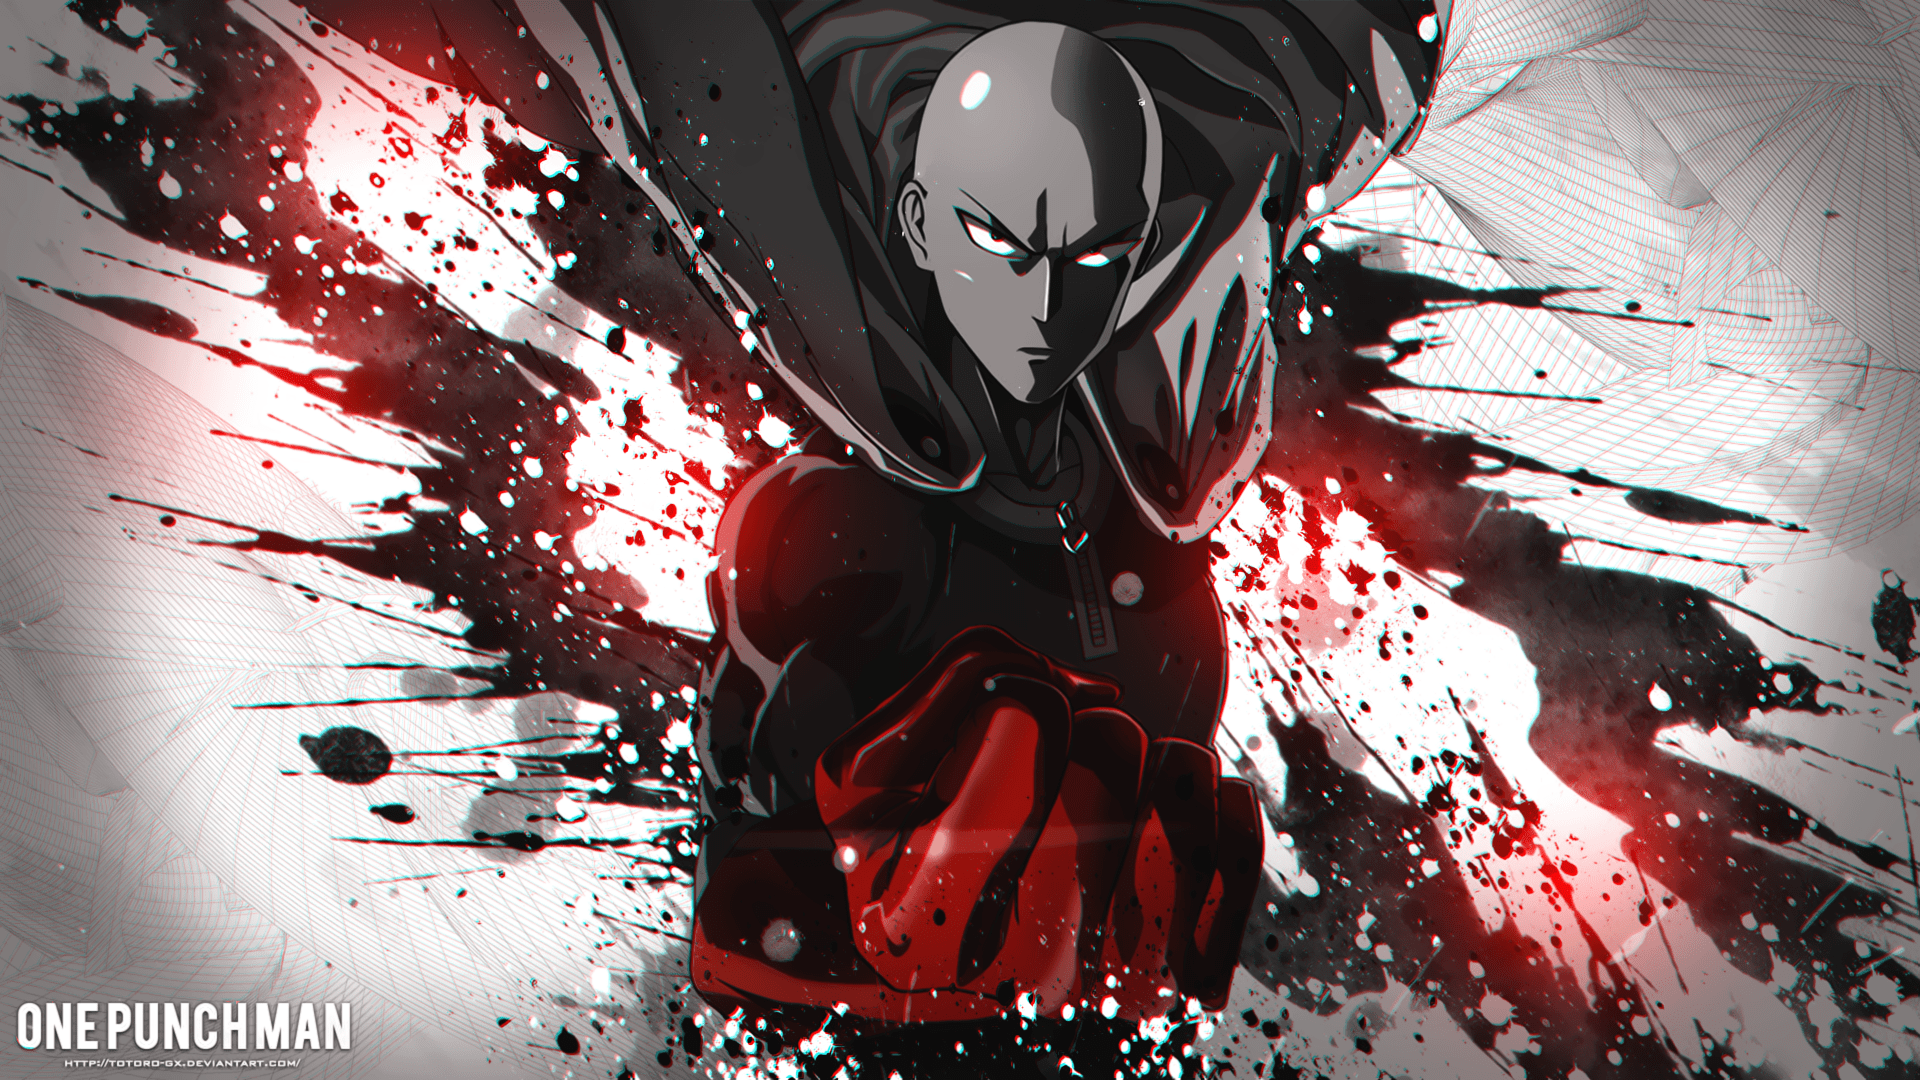 4k One Punch Man Wallpapers iPhone Android and Desktop  The RamenSwag